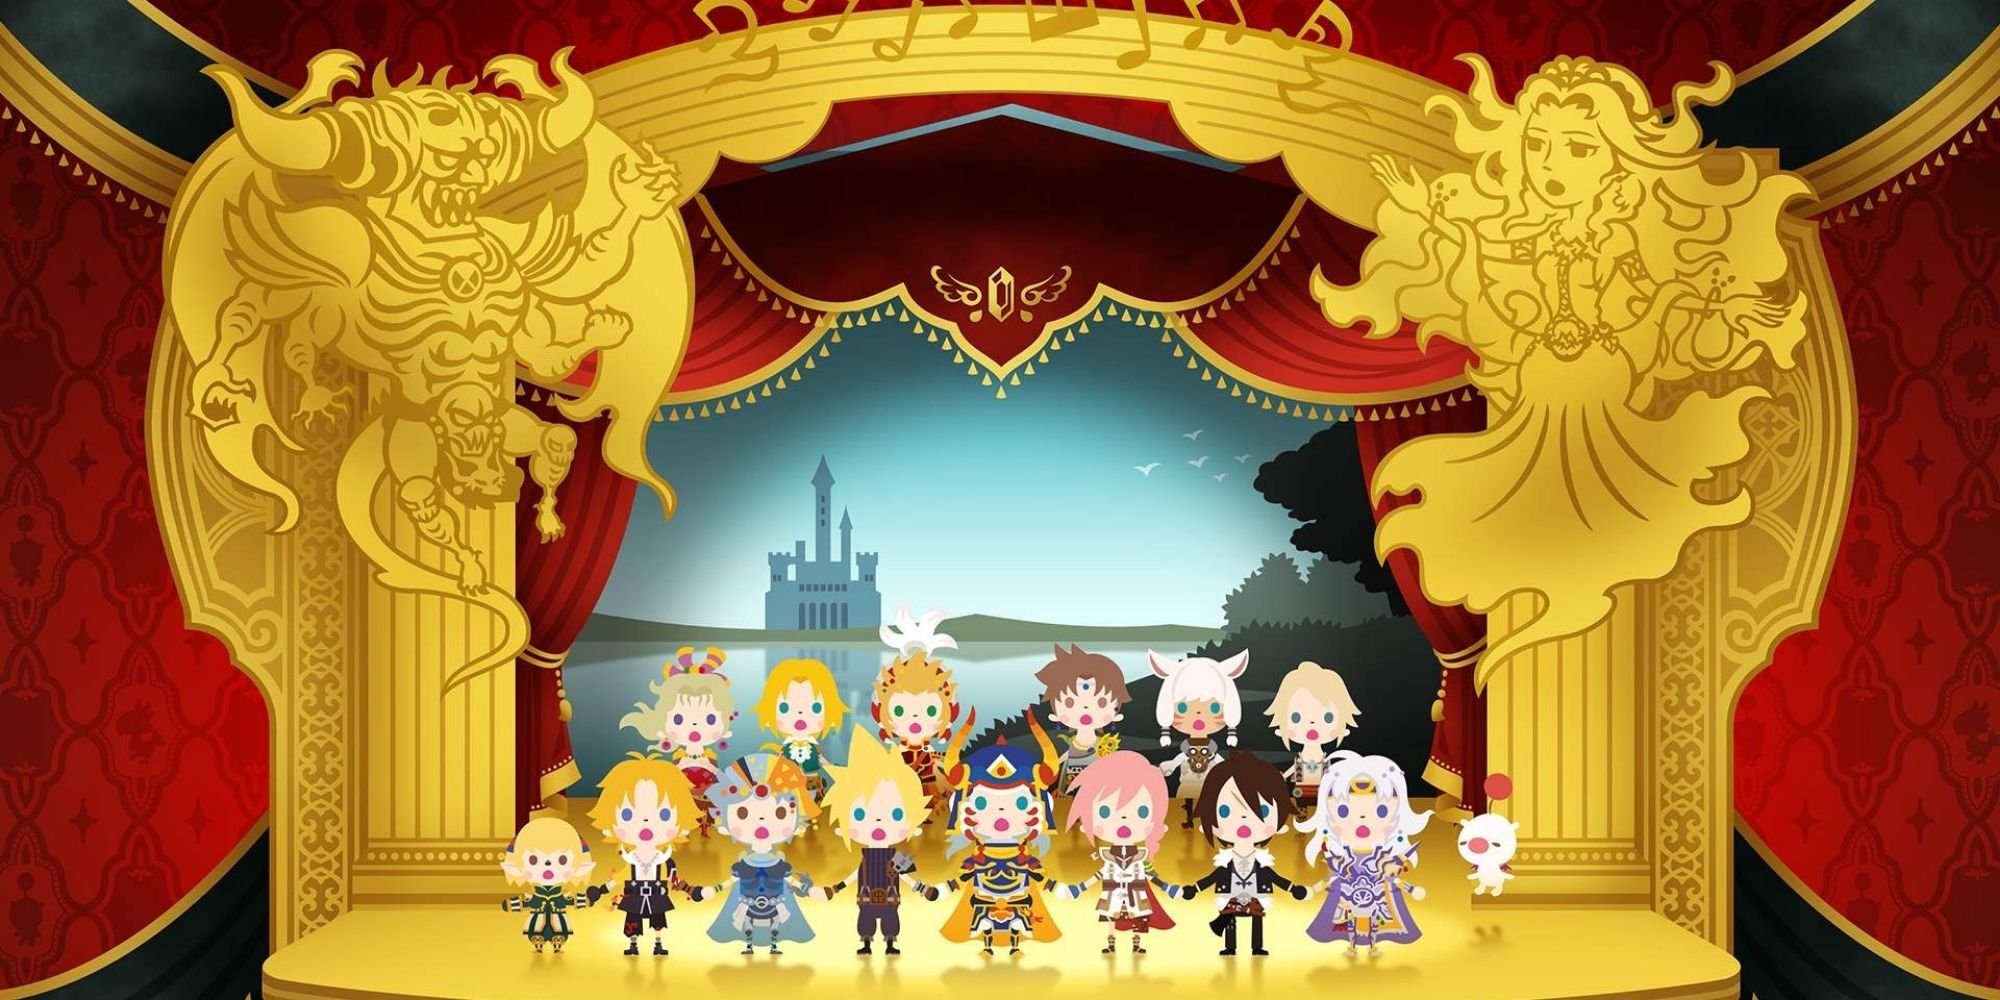 Theatrhythm Cast Of Final Fantasy Series Stands On A Stage Holding Hands And Singing